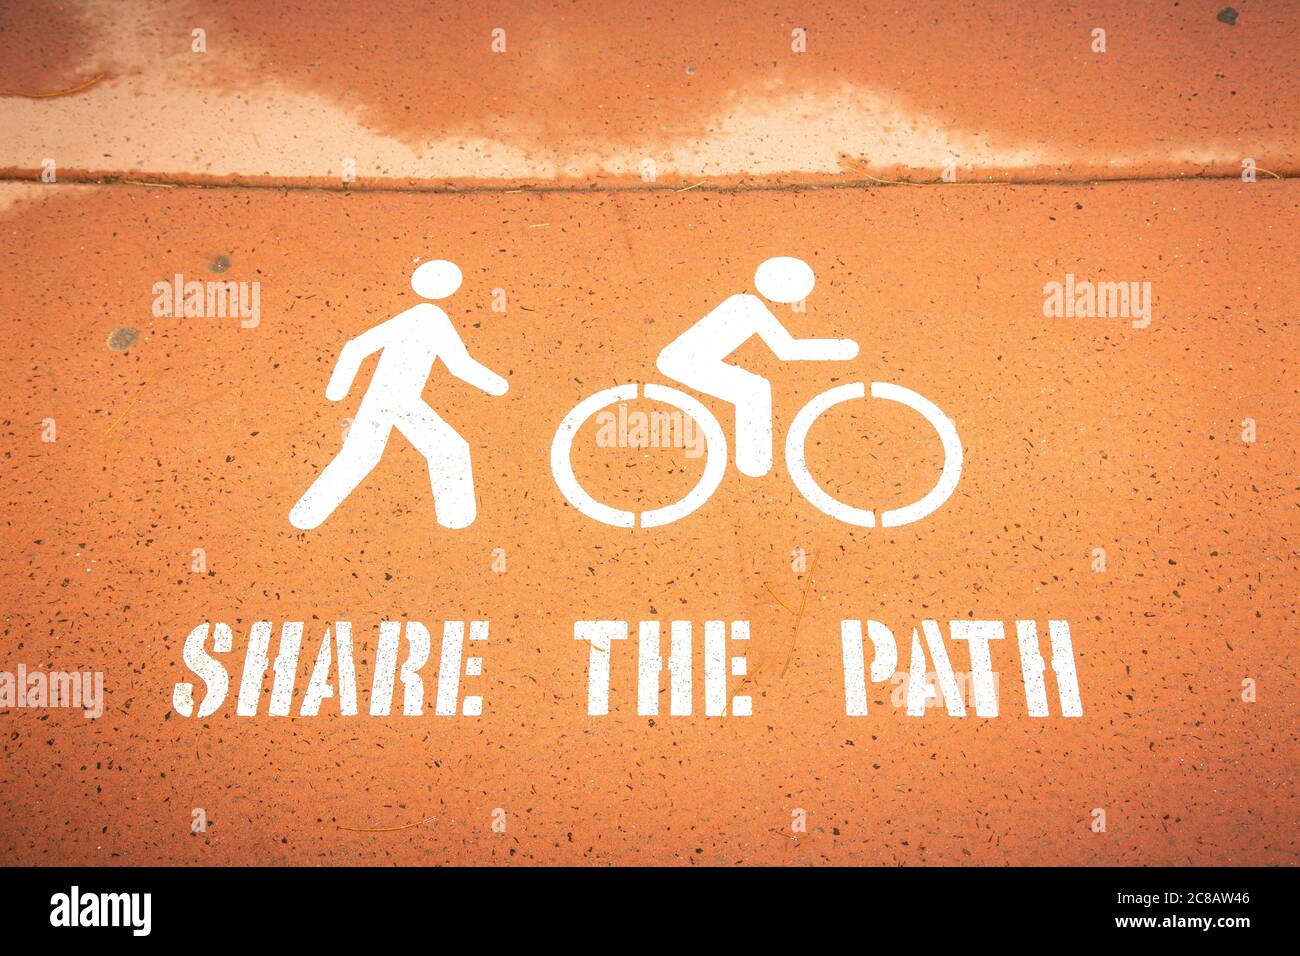 Share the path signage on footpath. Stock Photo